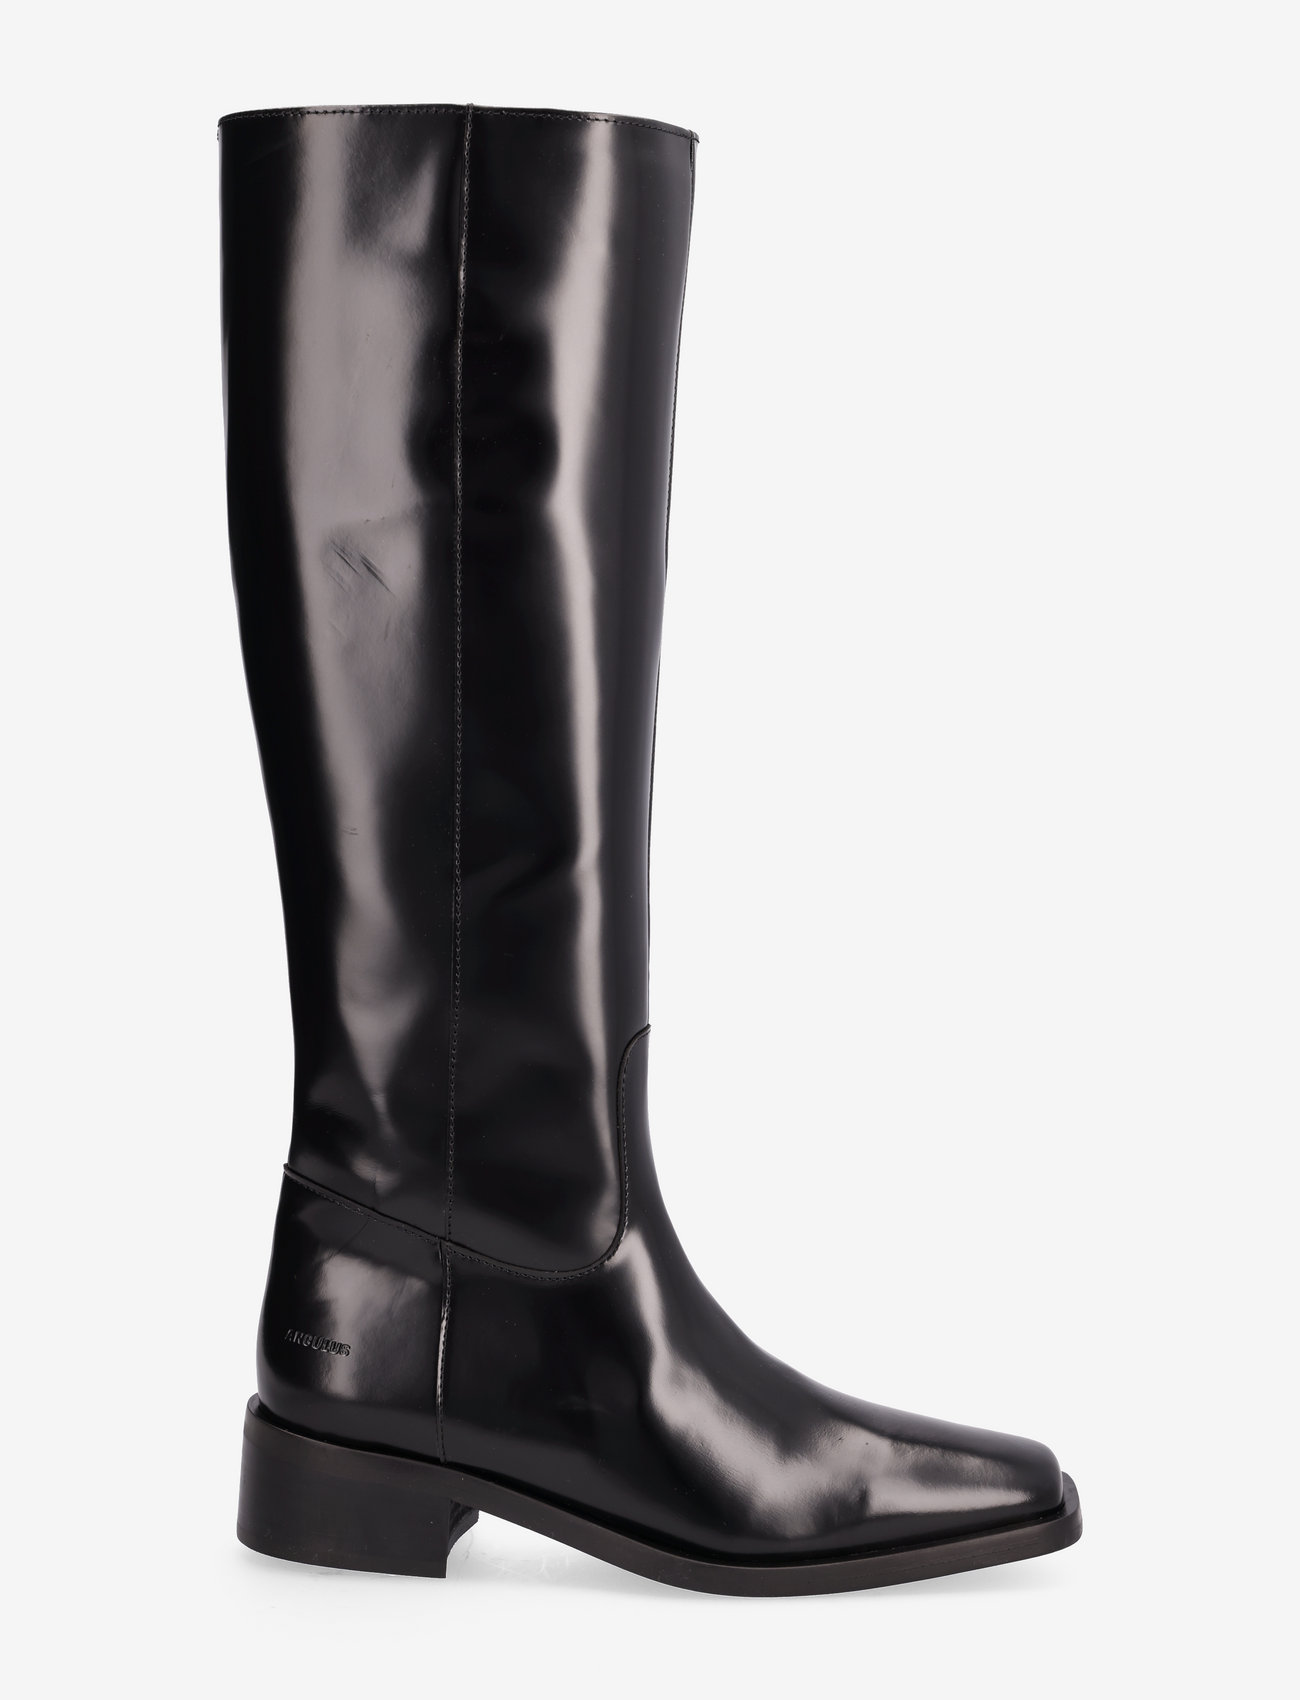 ANGULUS - Booties - flat - with zipper - knee high boots - 1425 black - 1